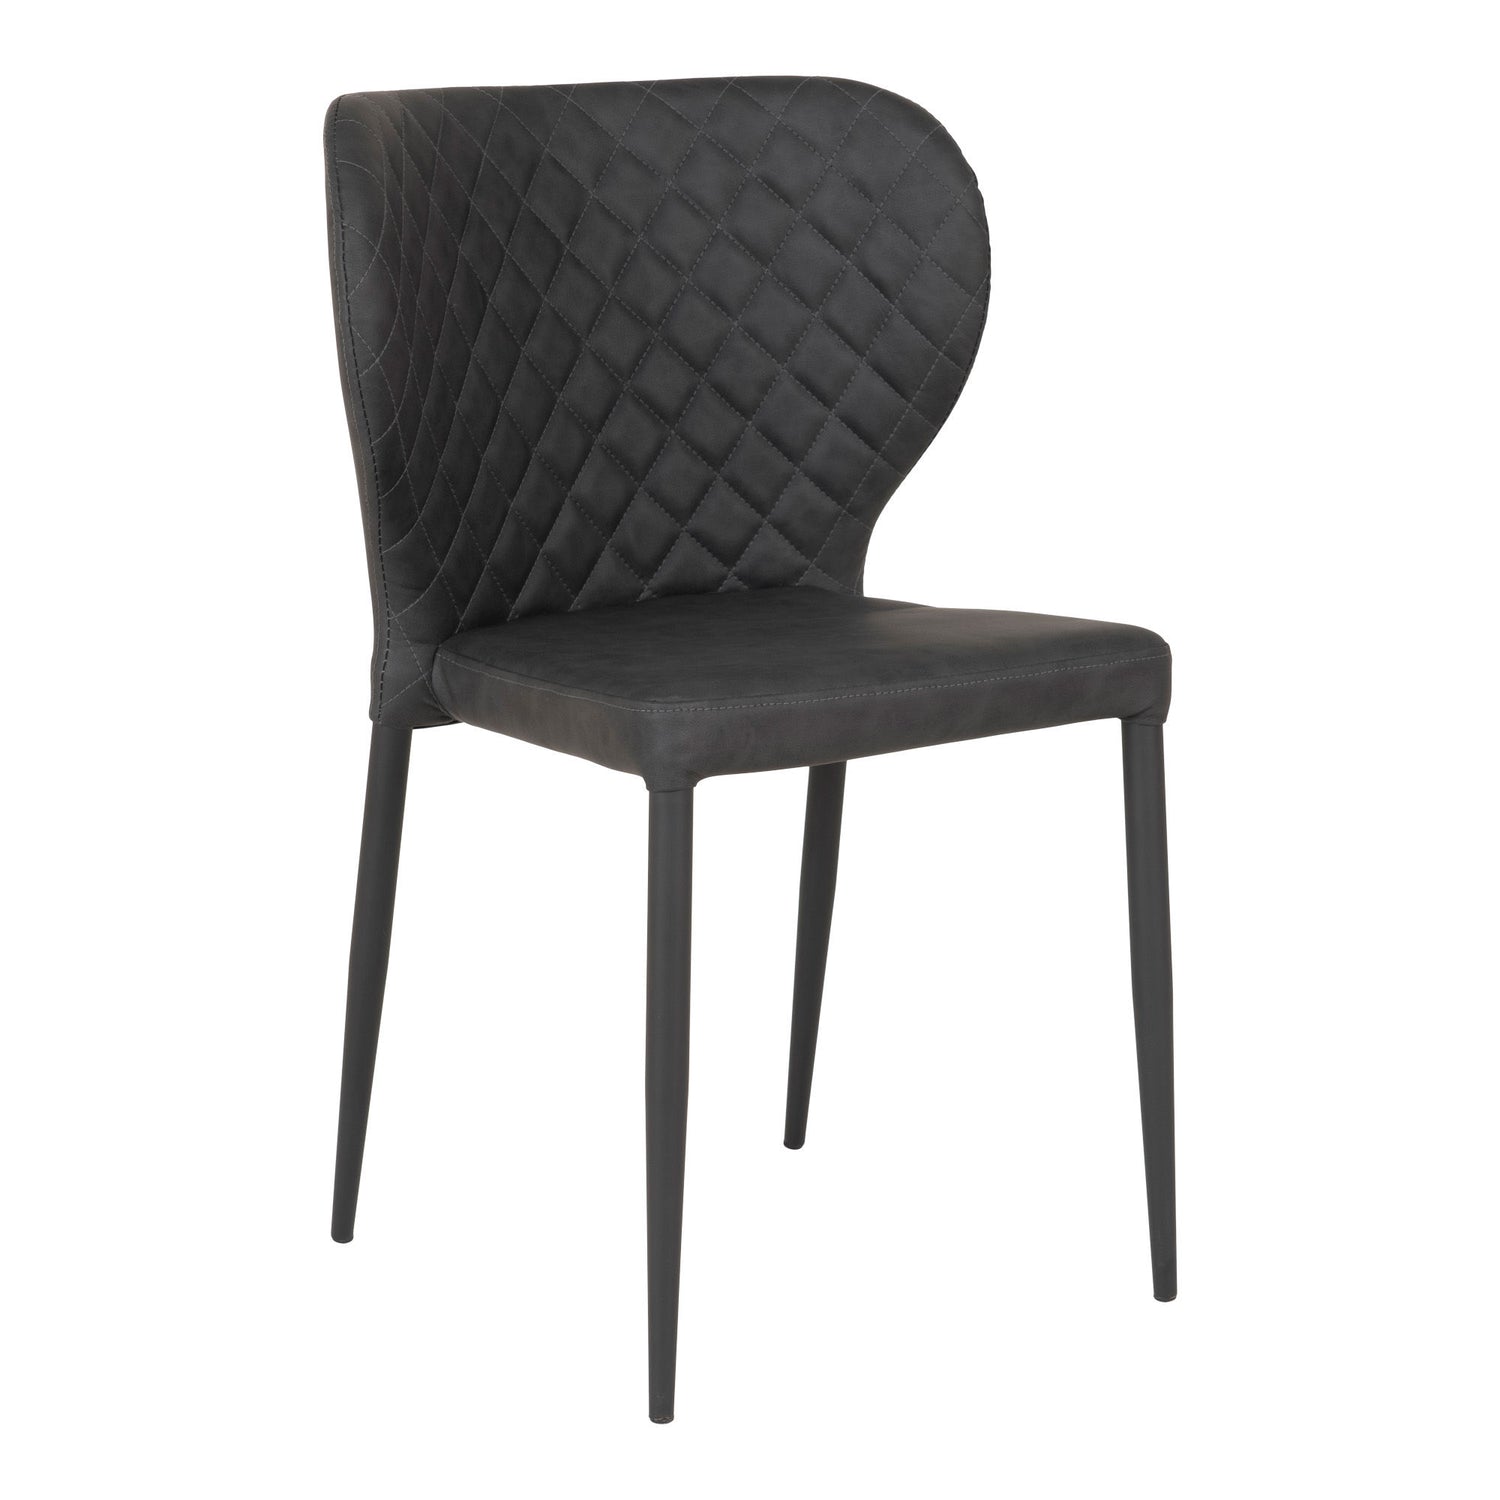 House Nordic - Pisa Dining Table Chair